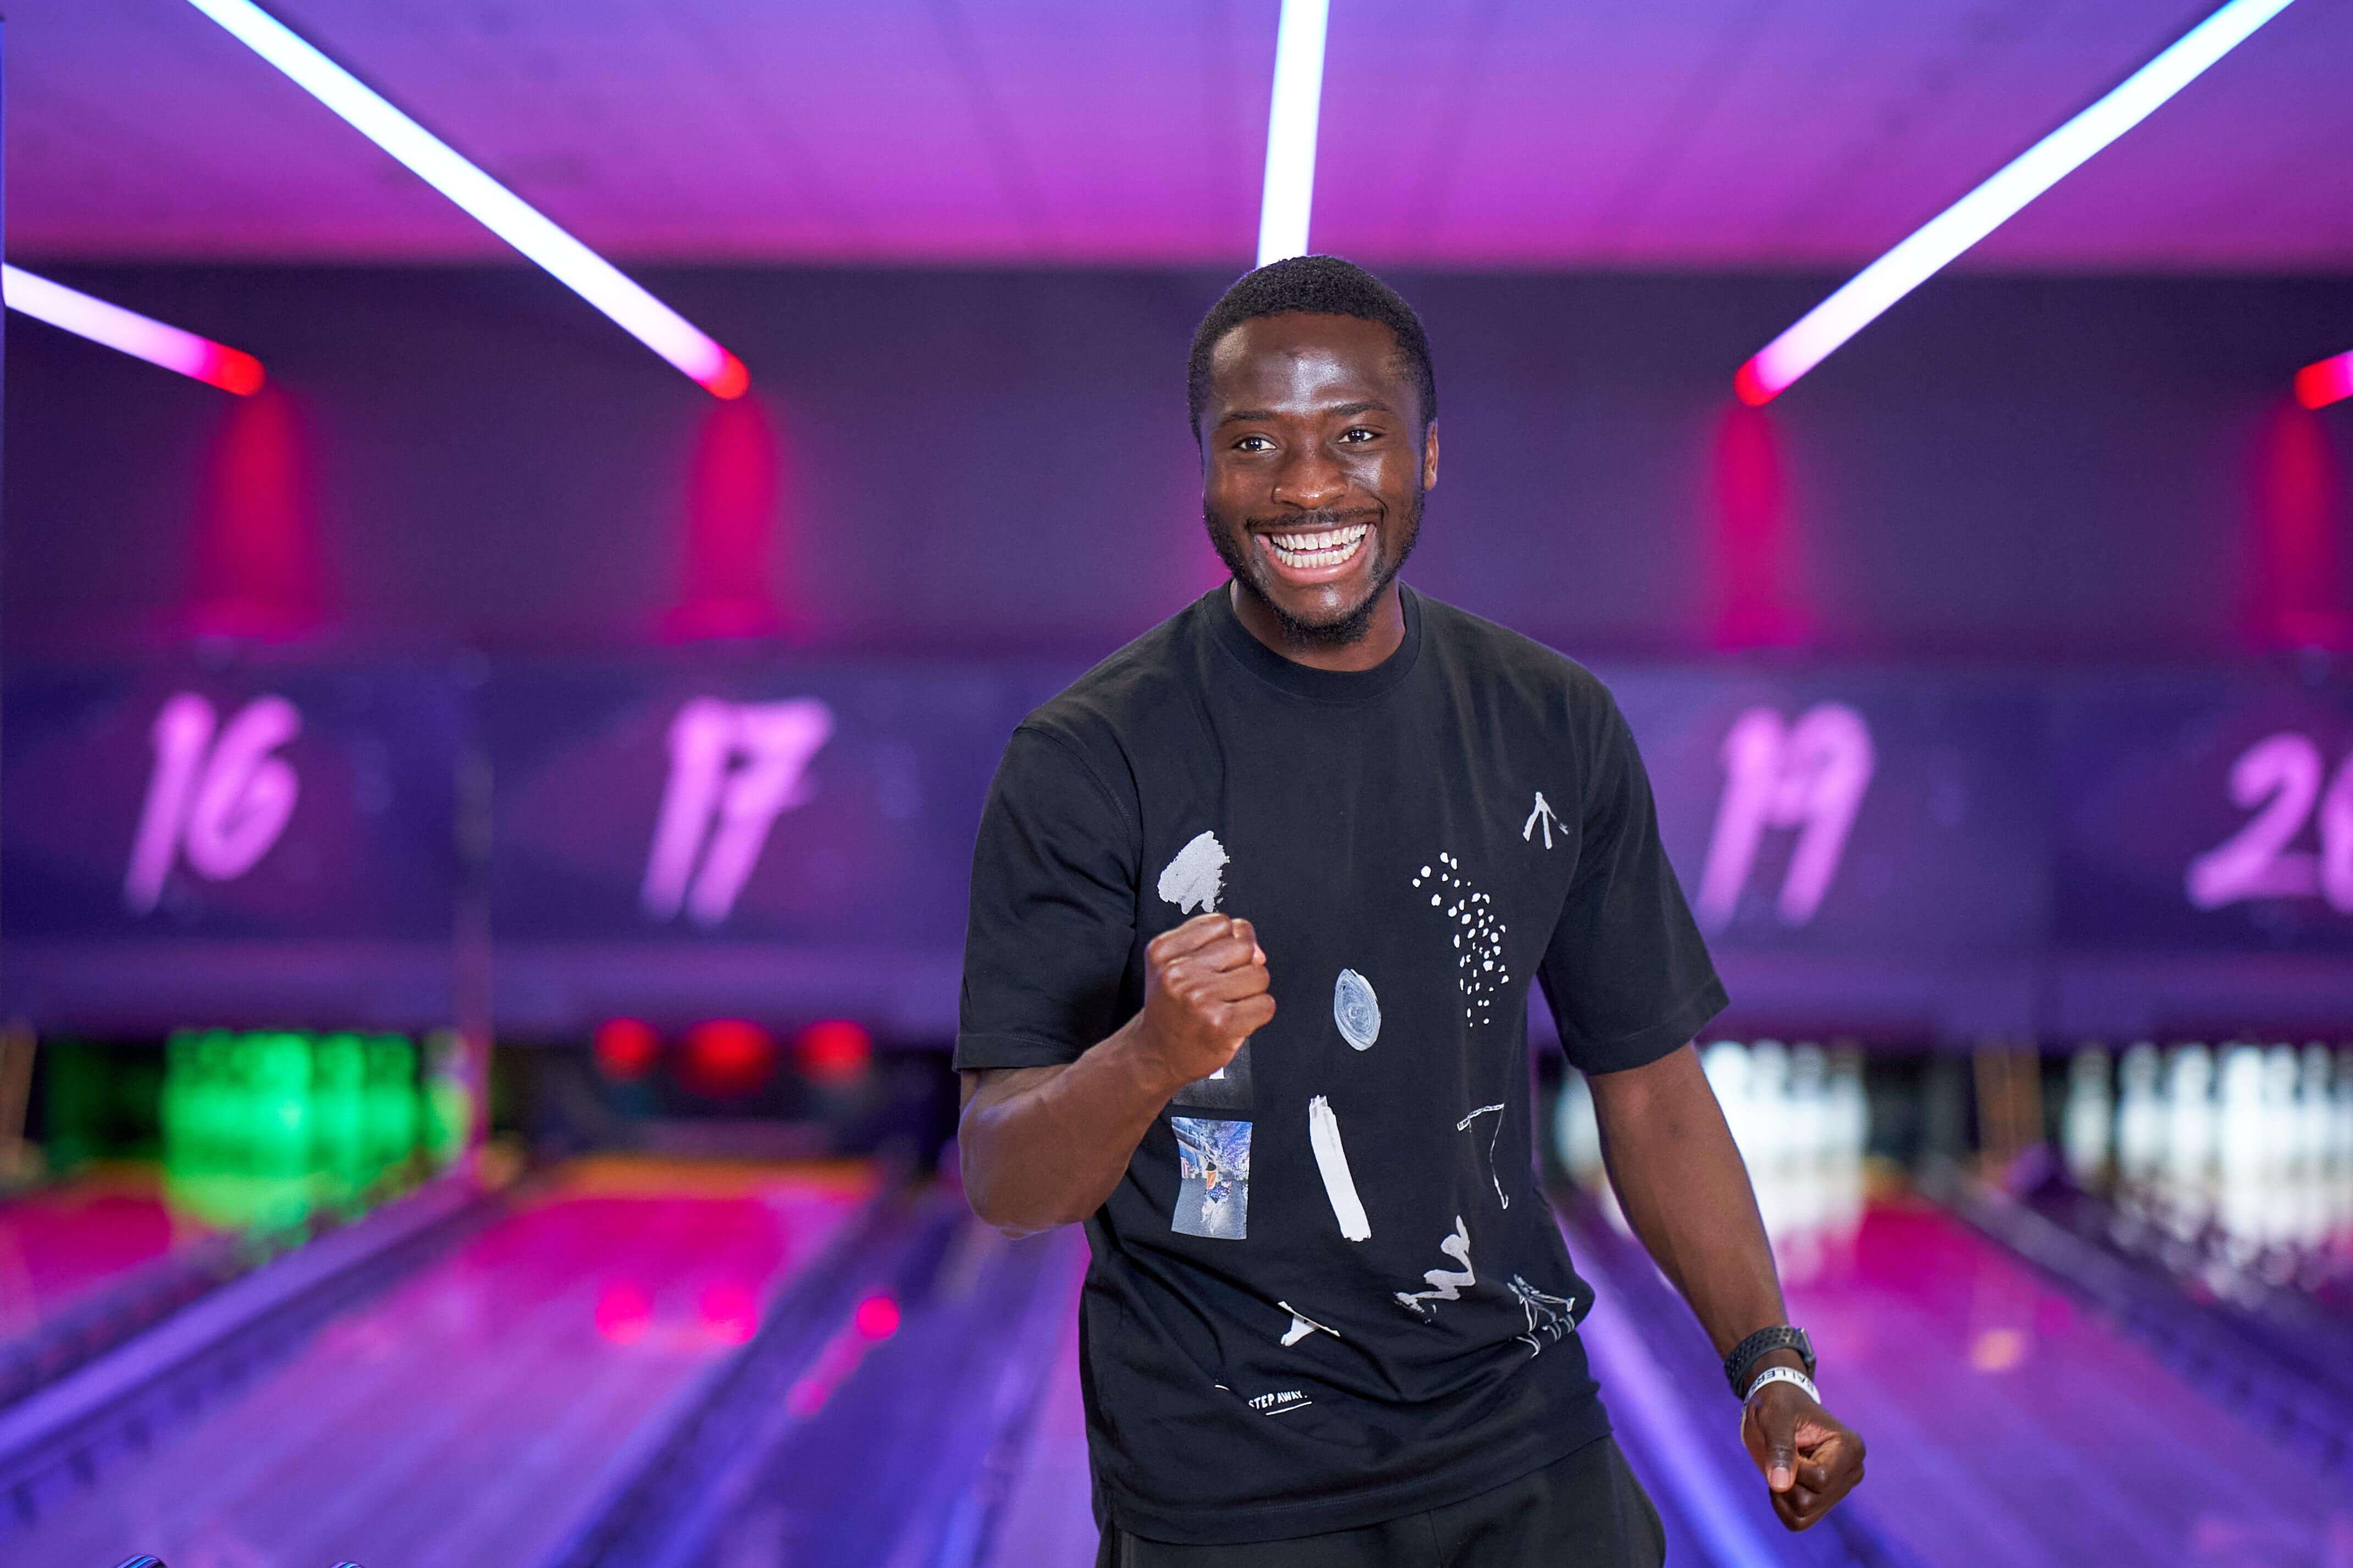 Man celebrating a great shot on the lanes